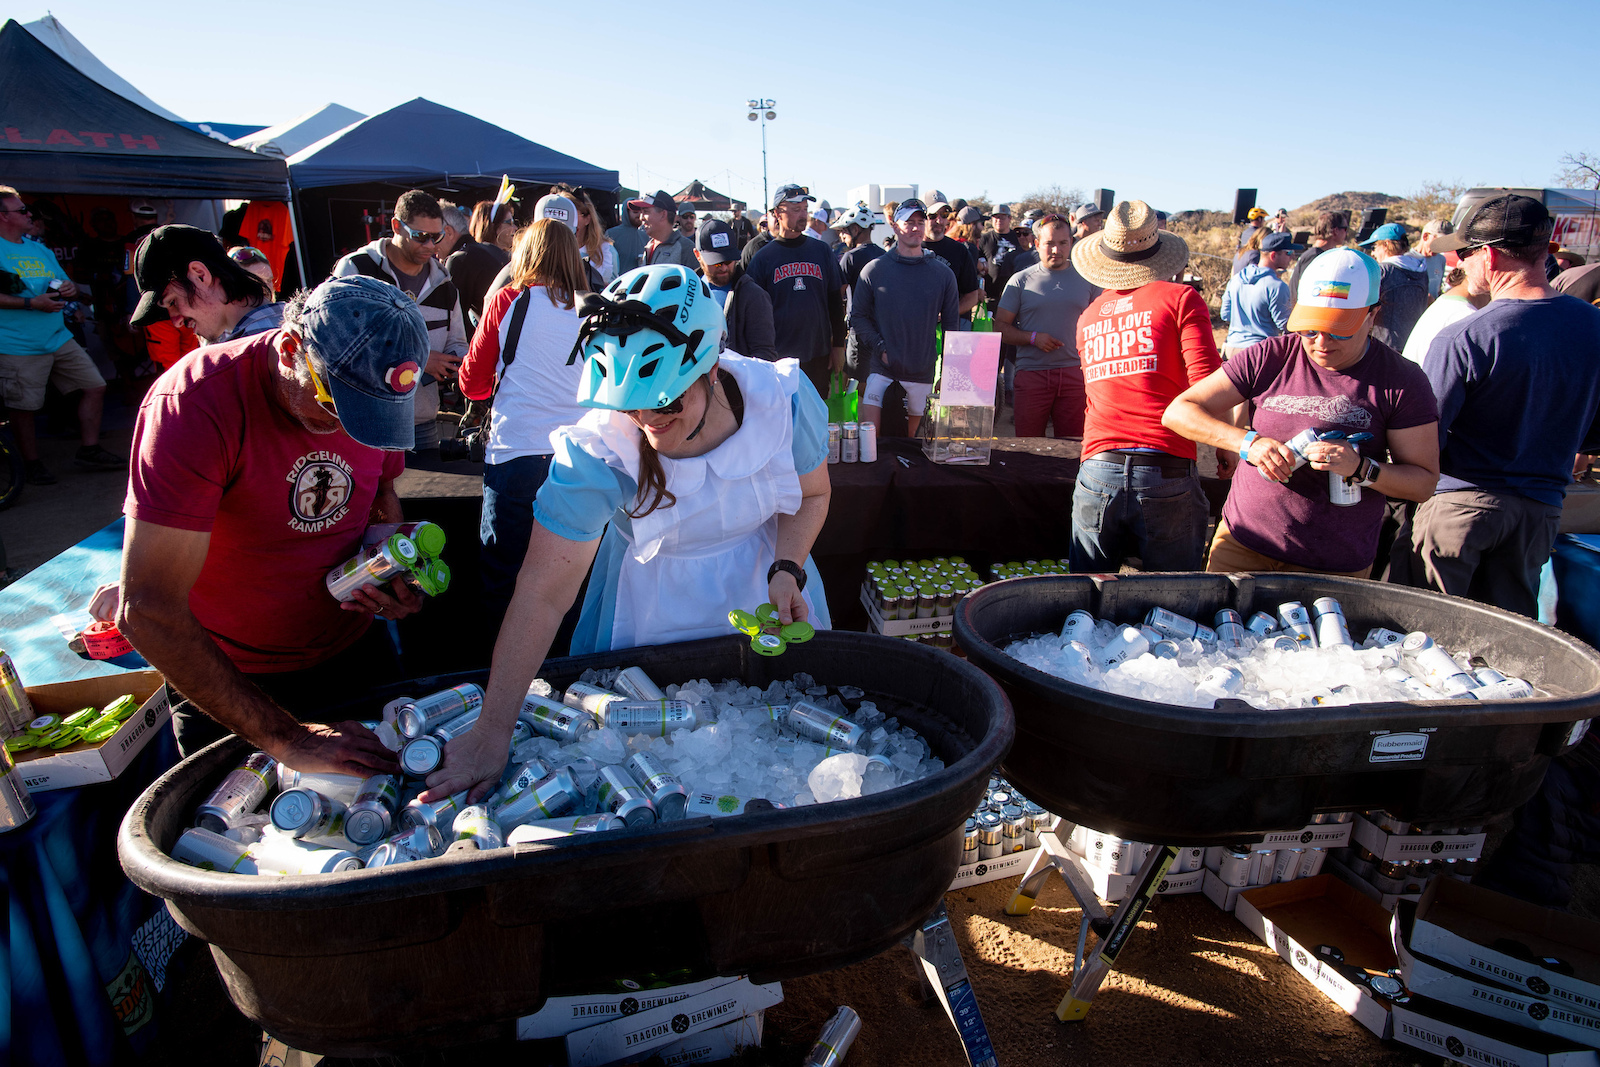 Volunteers from Sonoran Desert Mountain Bikers serve up beers during the dedication event on Friday.